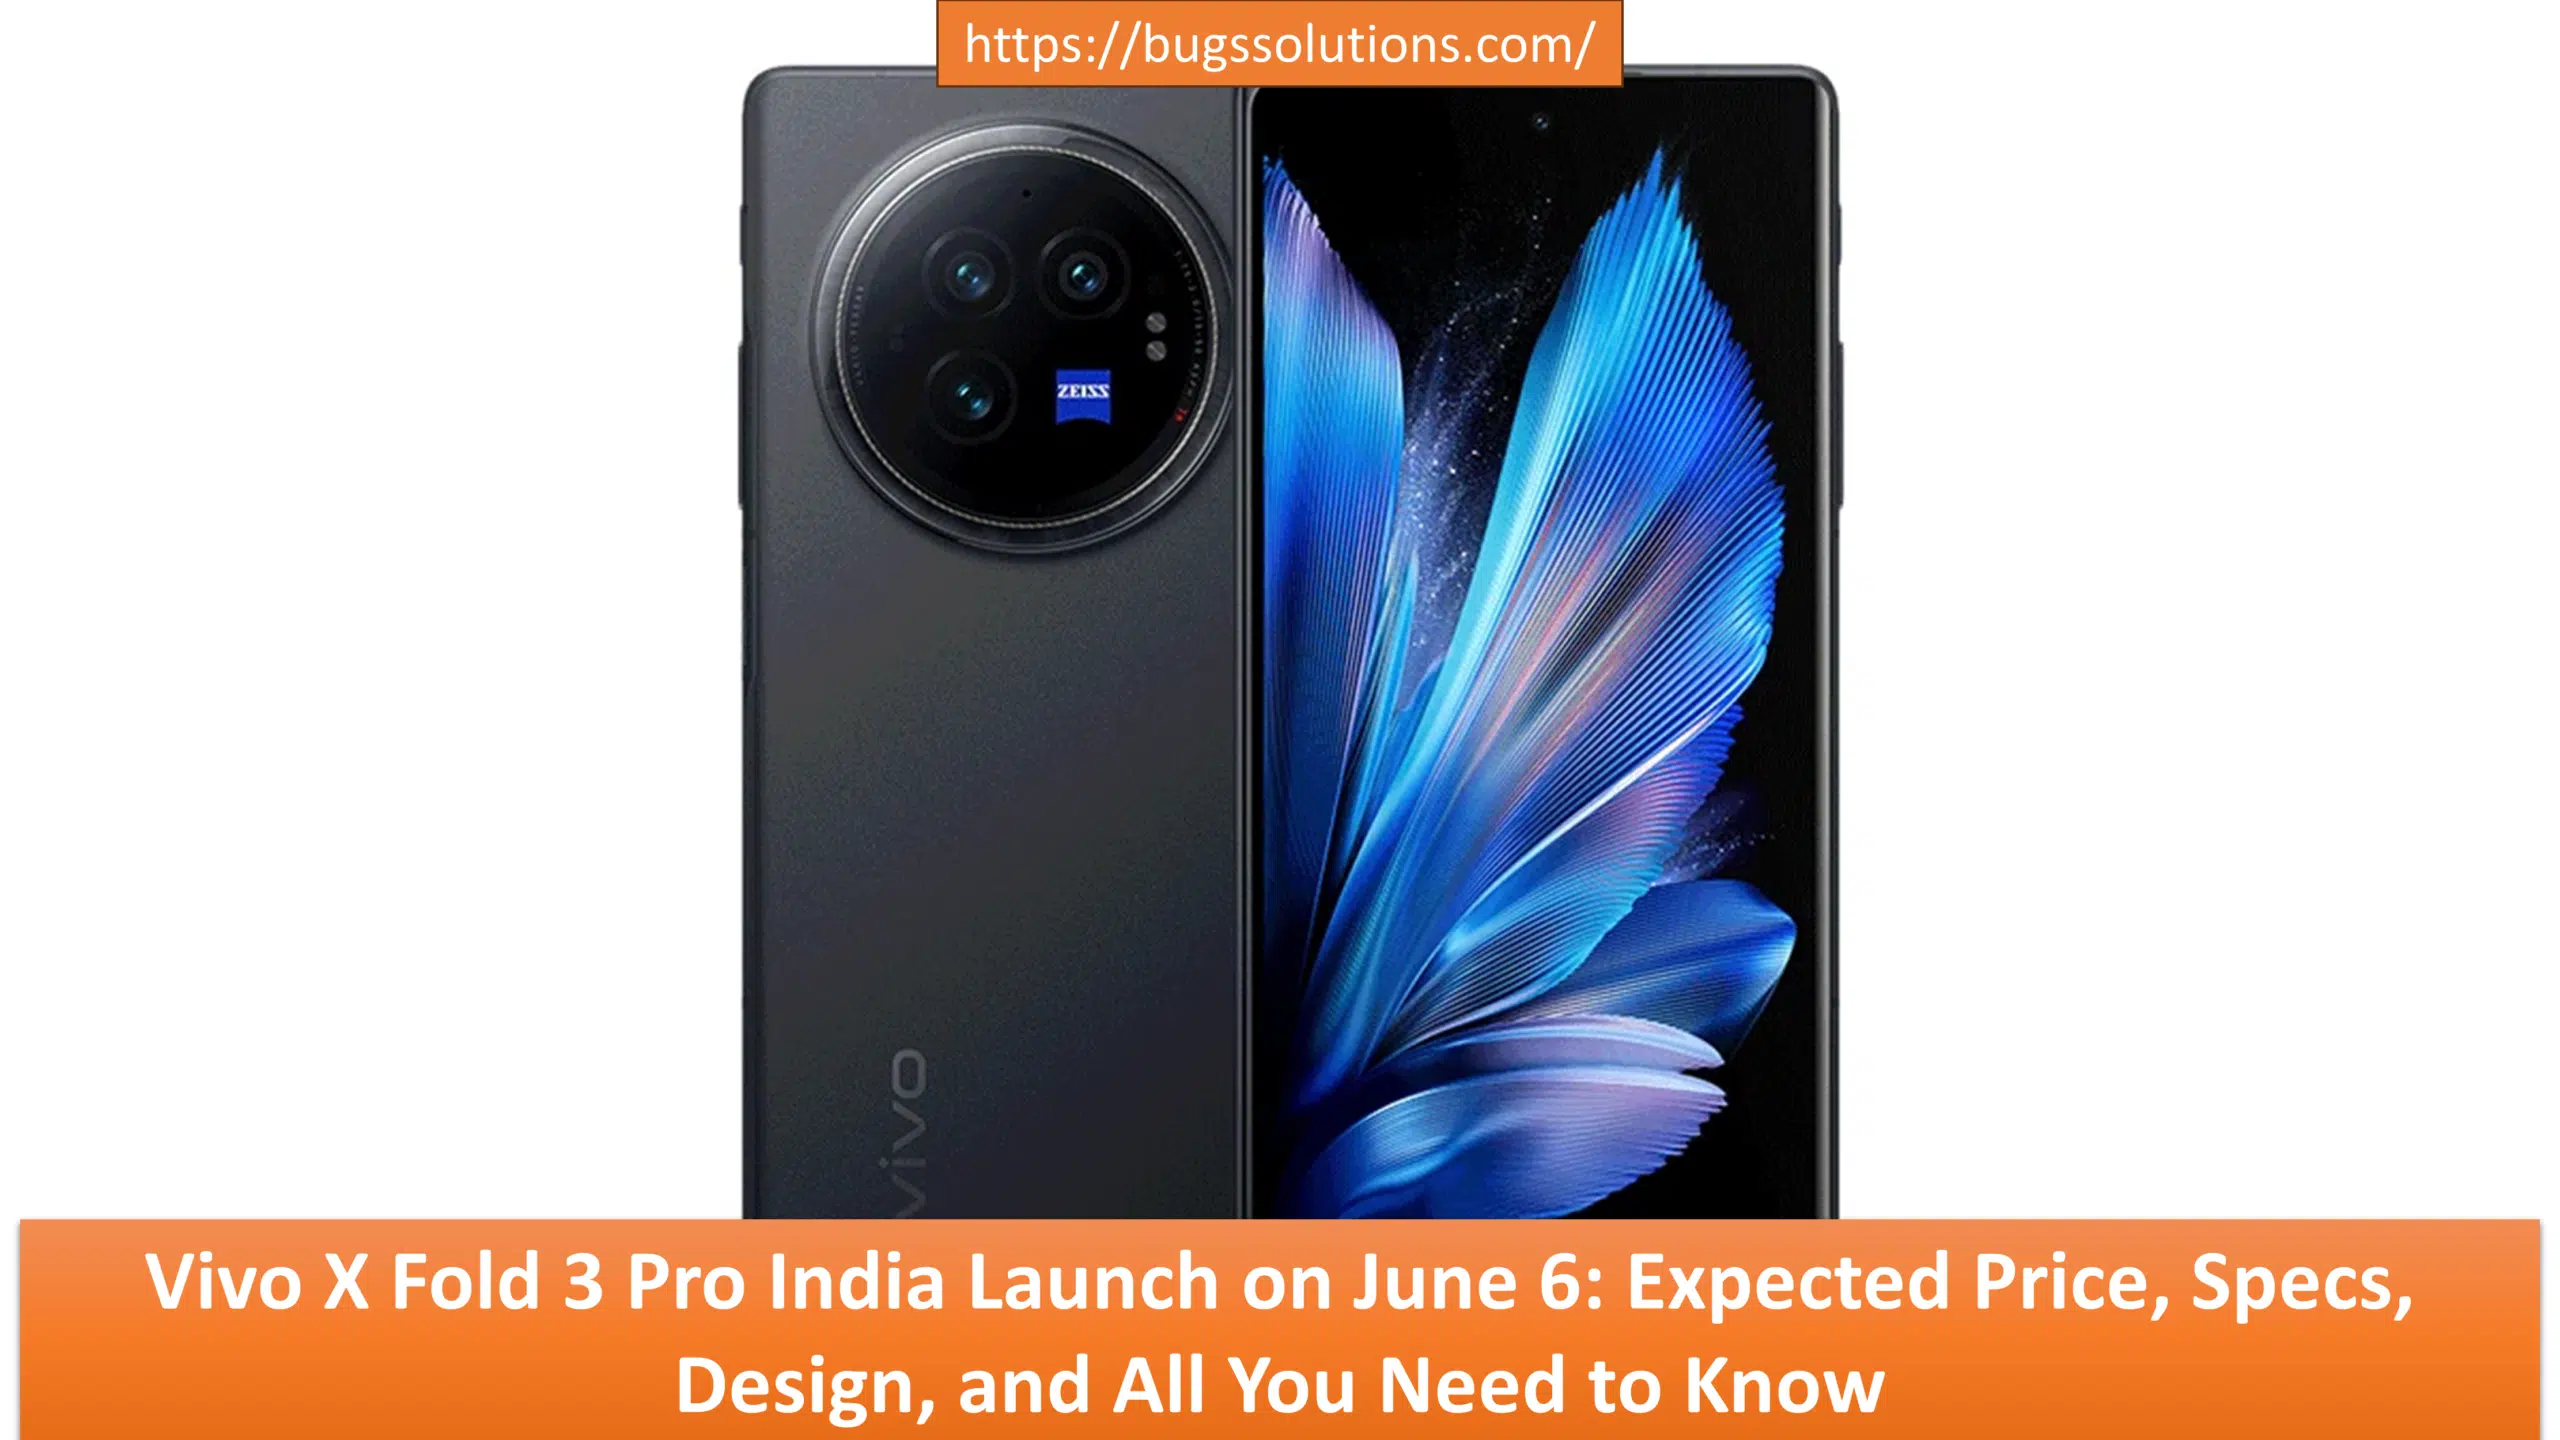 Vivo X Fold 3 Pro India Launch on June 6: Expected Price, Specs, Design, and All You Need to Know